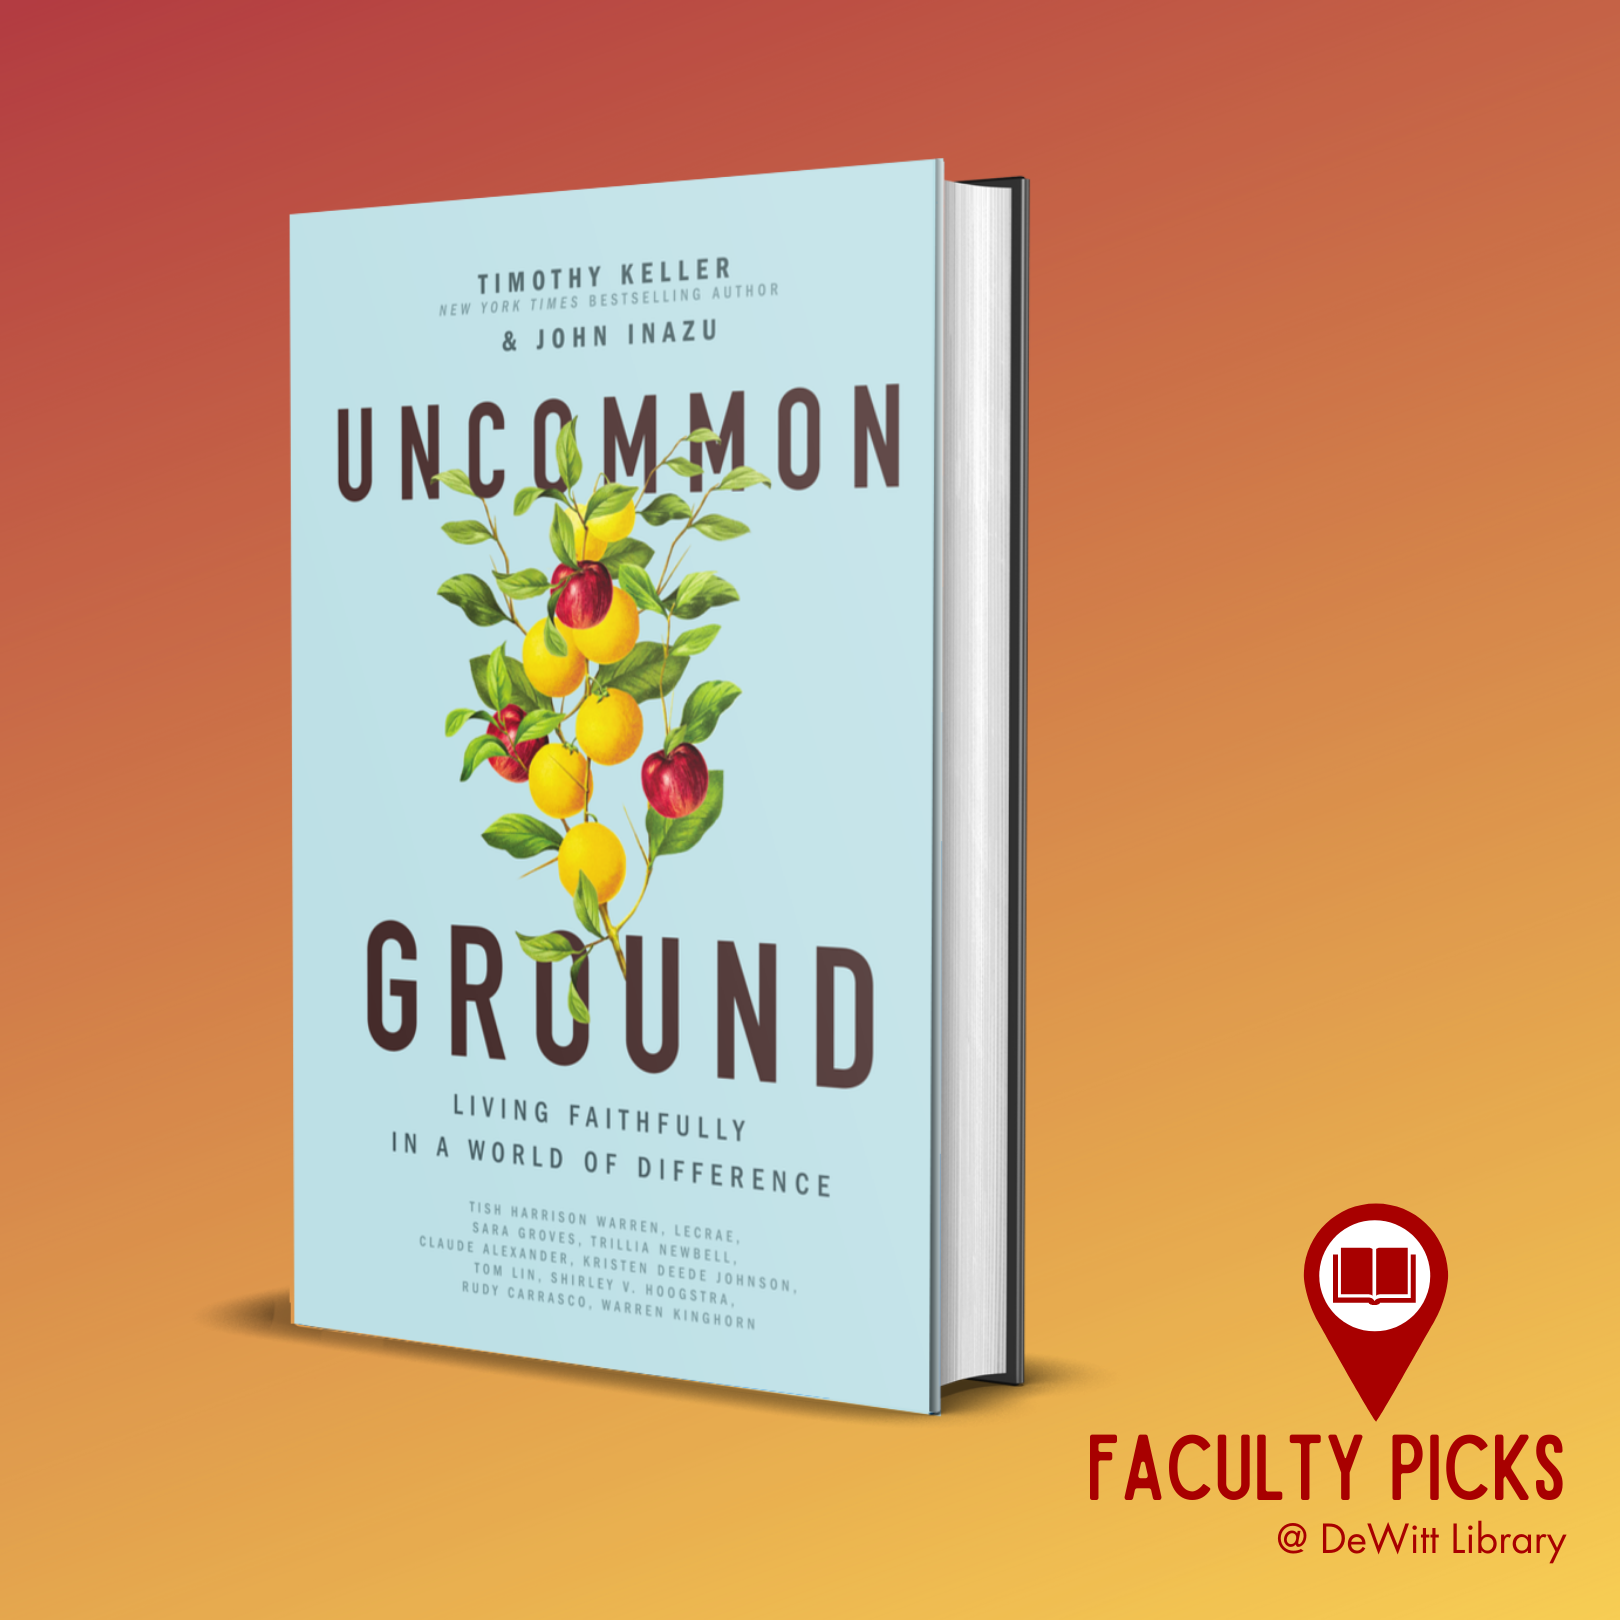 Faculty Pick book cover - Uncommon ground: living faithfully in a world of difference